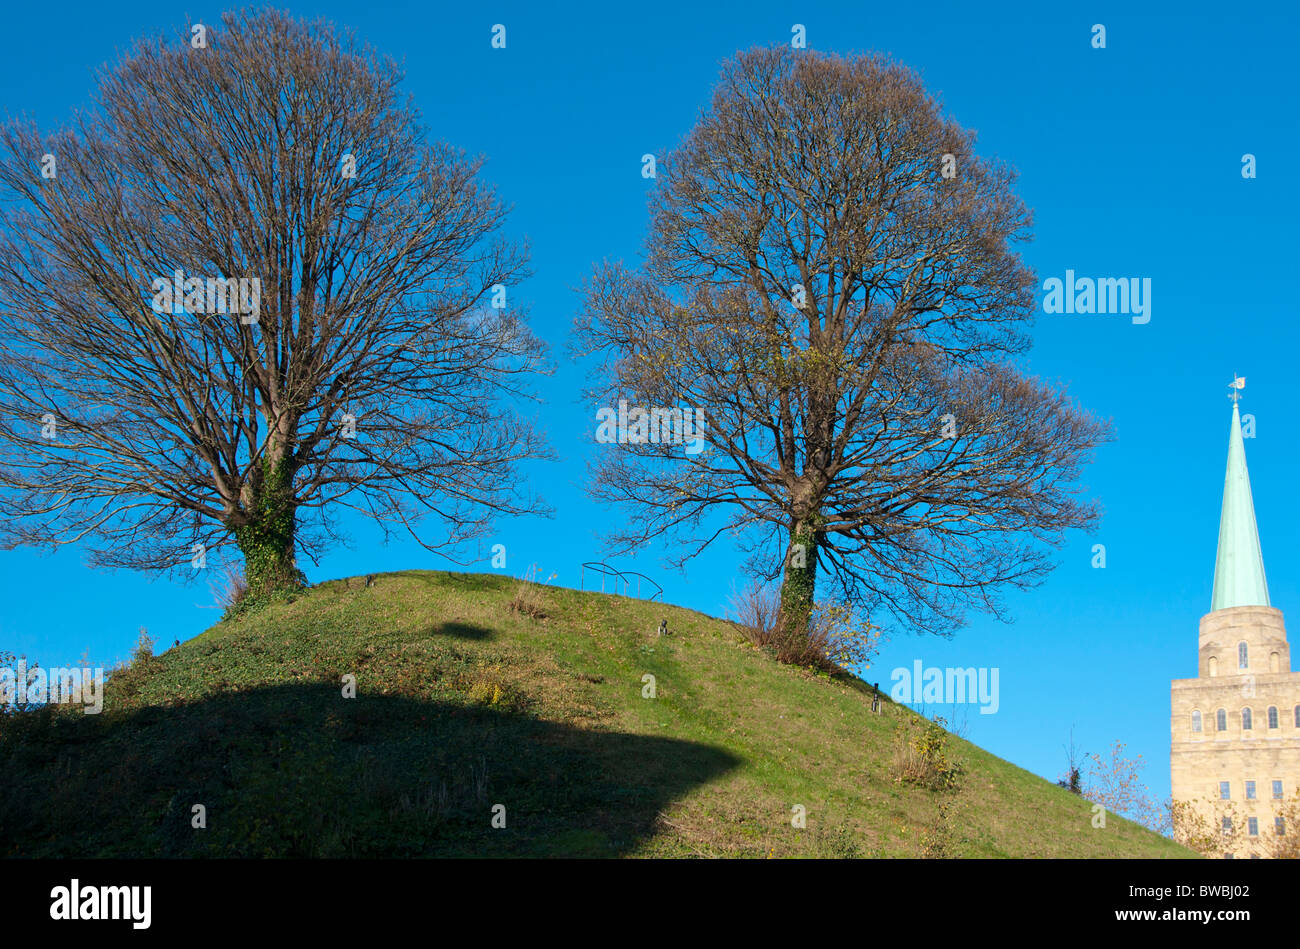 Two trees growing on Oxford Castle Mound with Nuffield College Spire in background, Oxford, England, UK Stock Photo